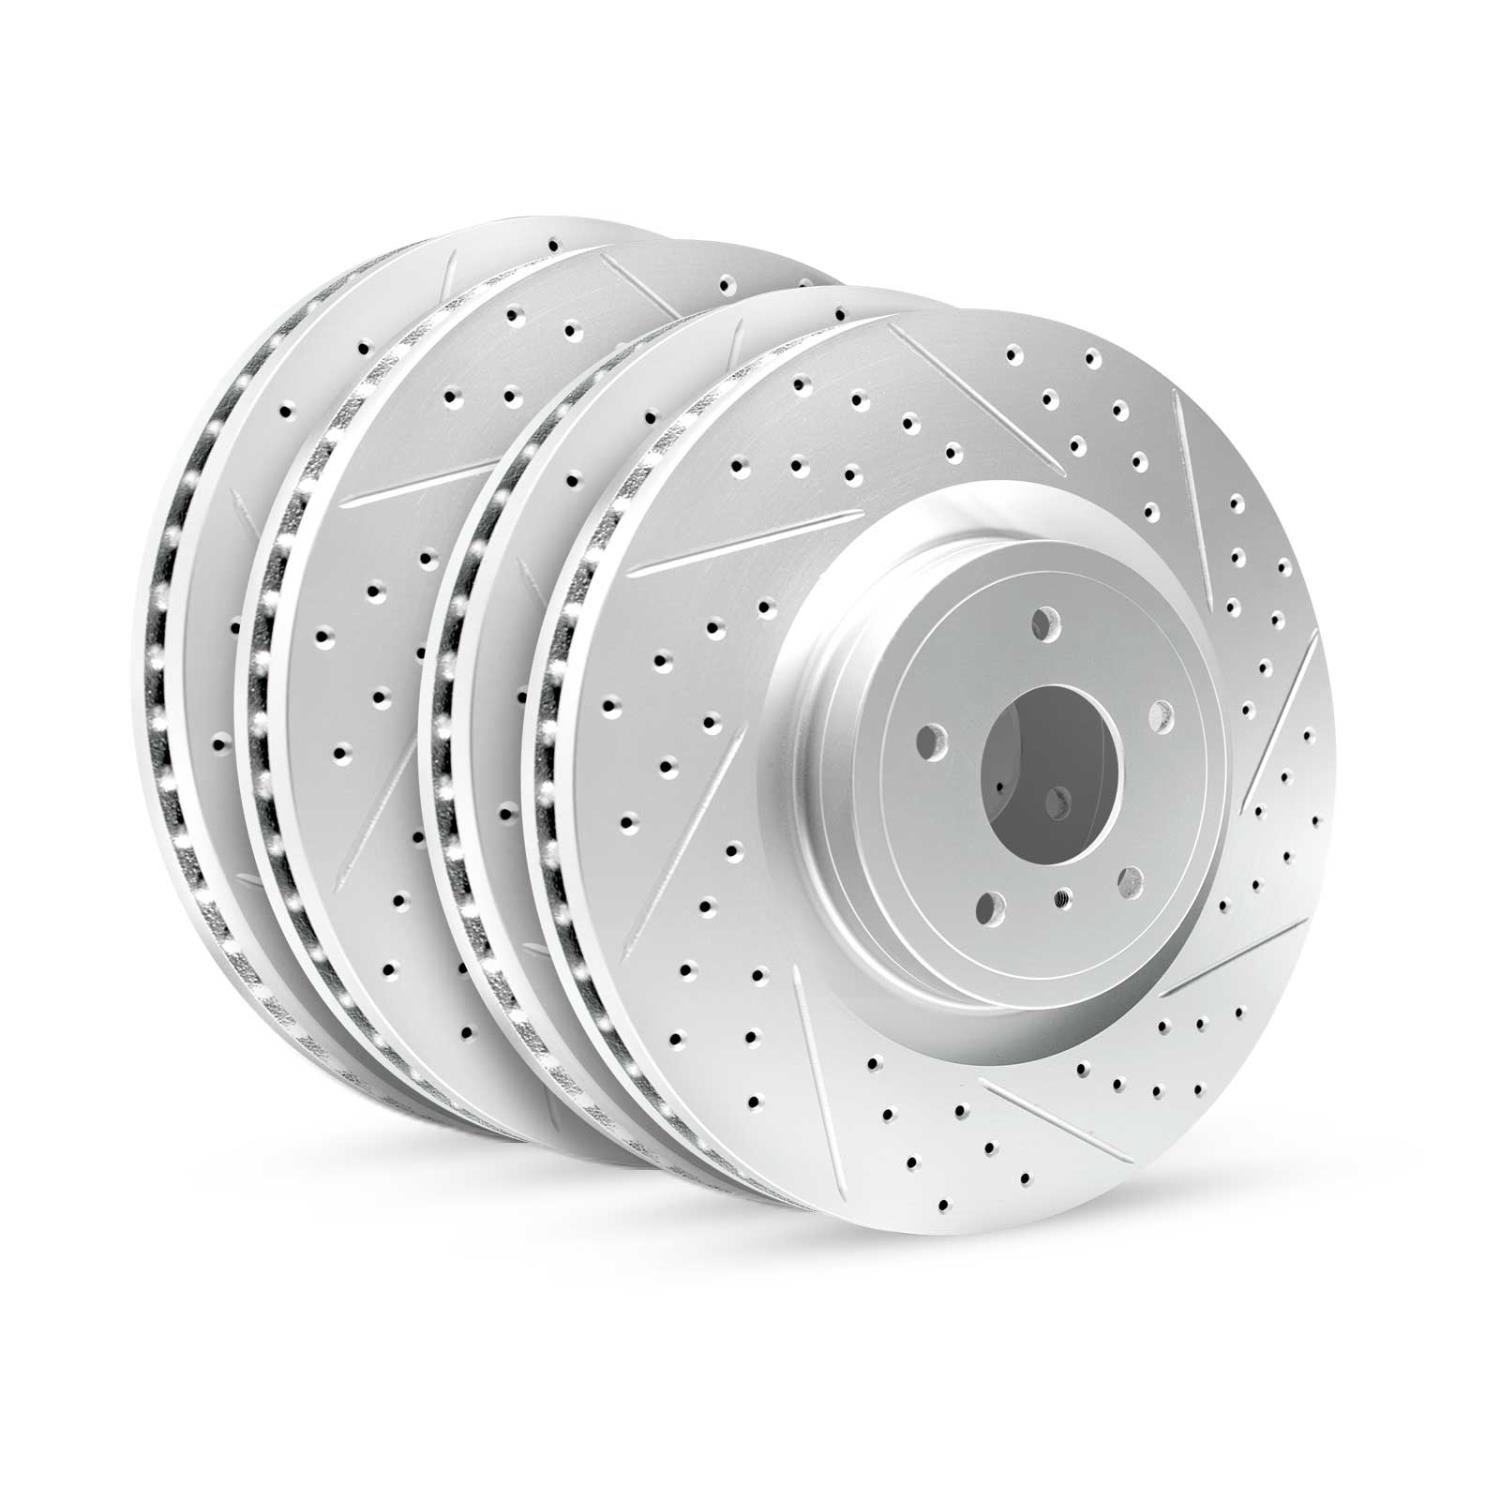 GEO-Carbon Drilled/Slotted Rotors, 1998-2001 Audi/Porsche/Volkswagen, Position: Front/Rear